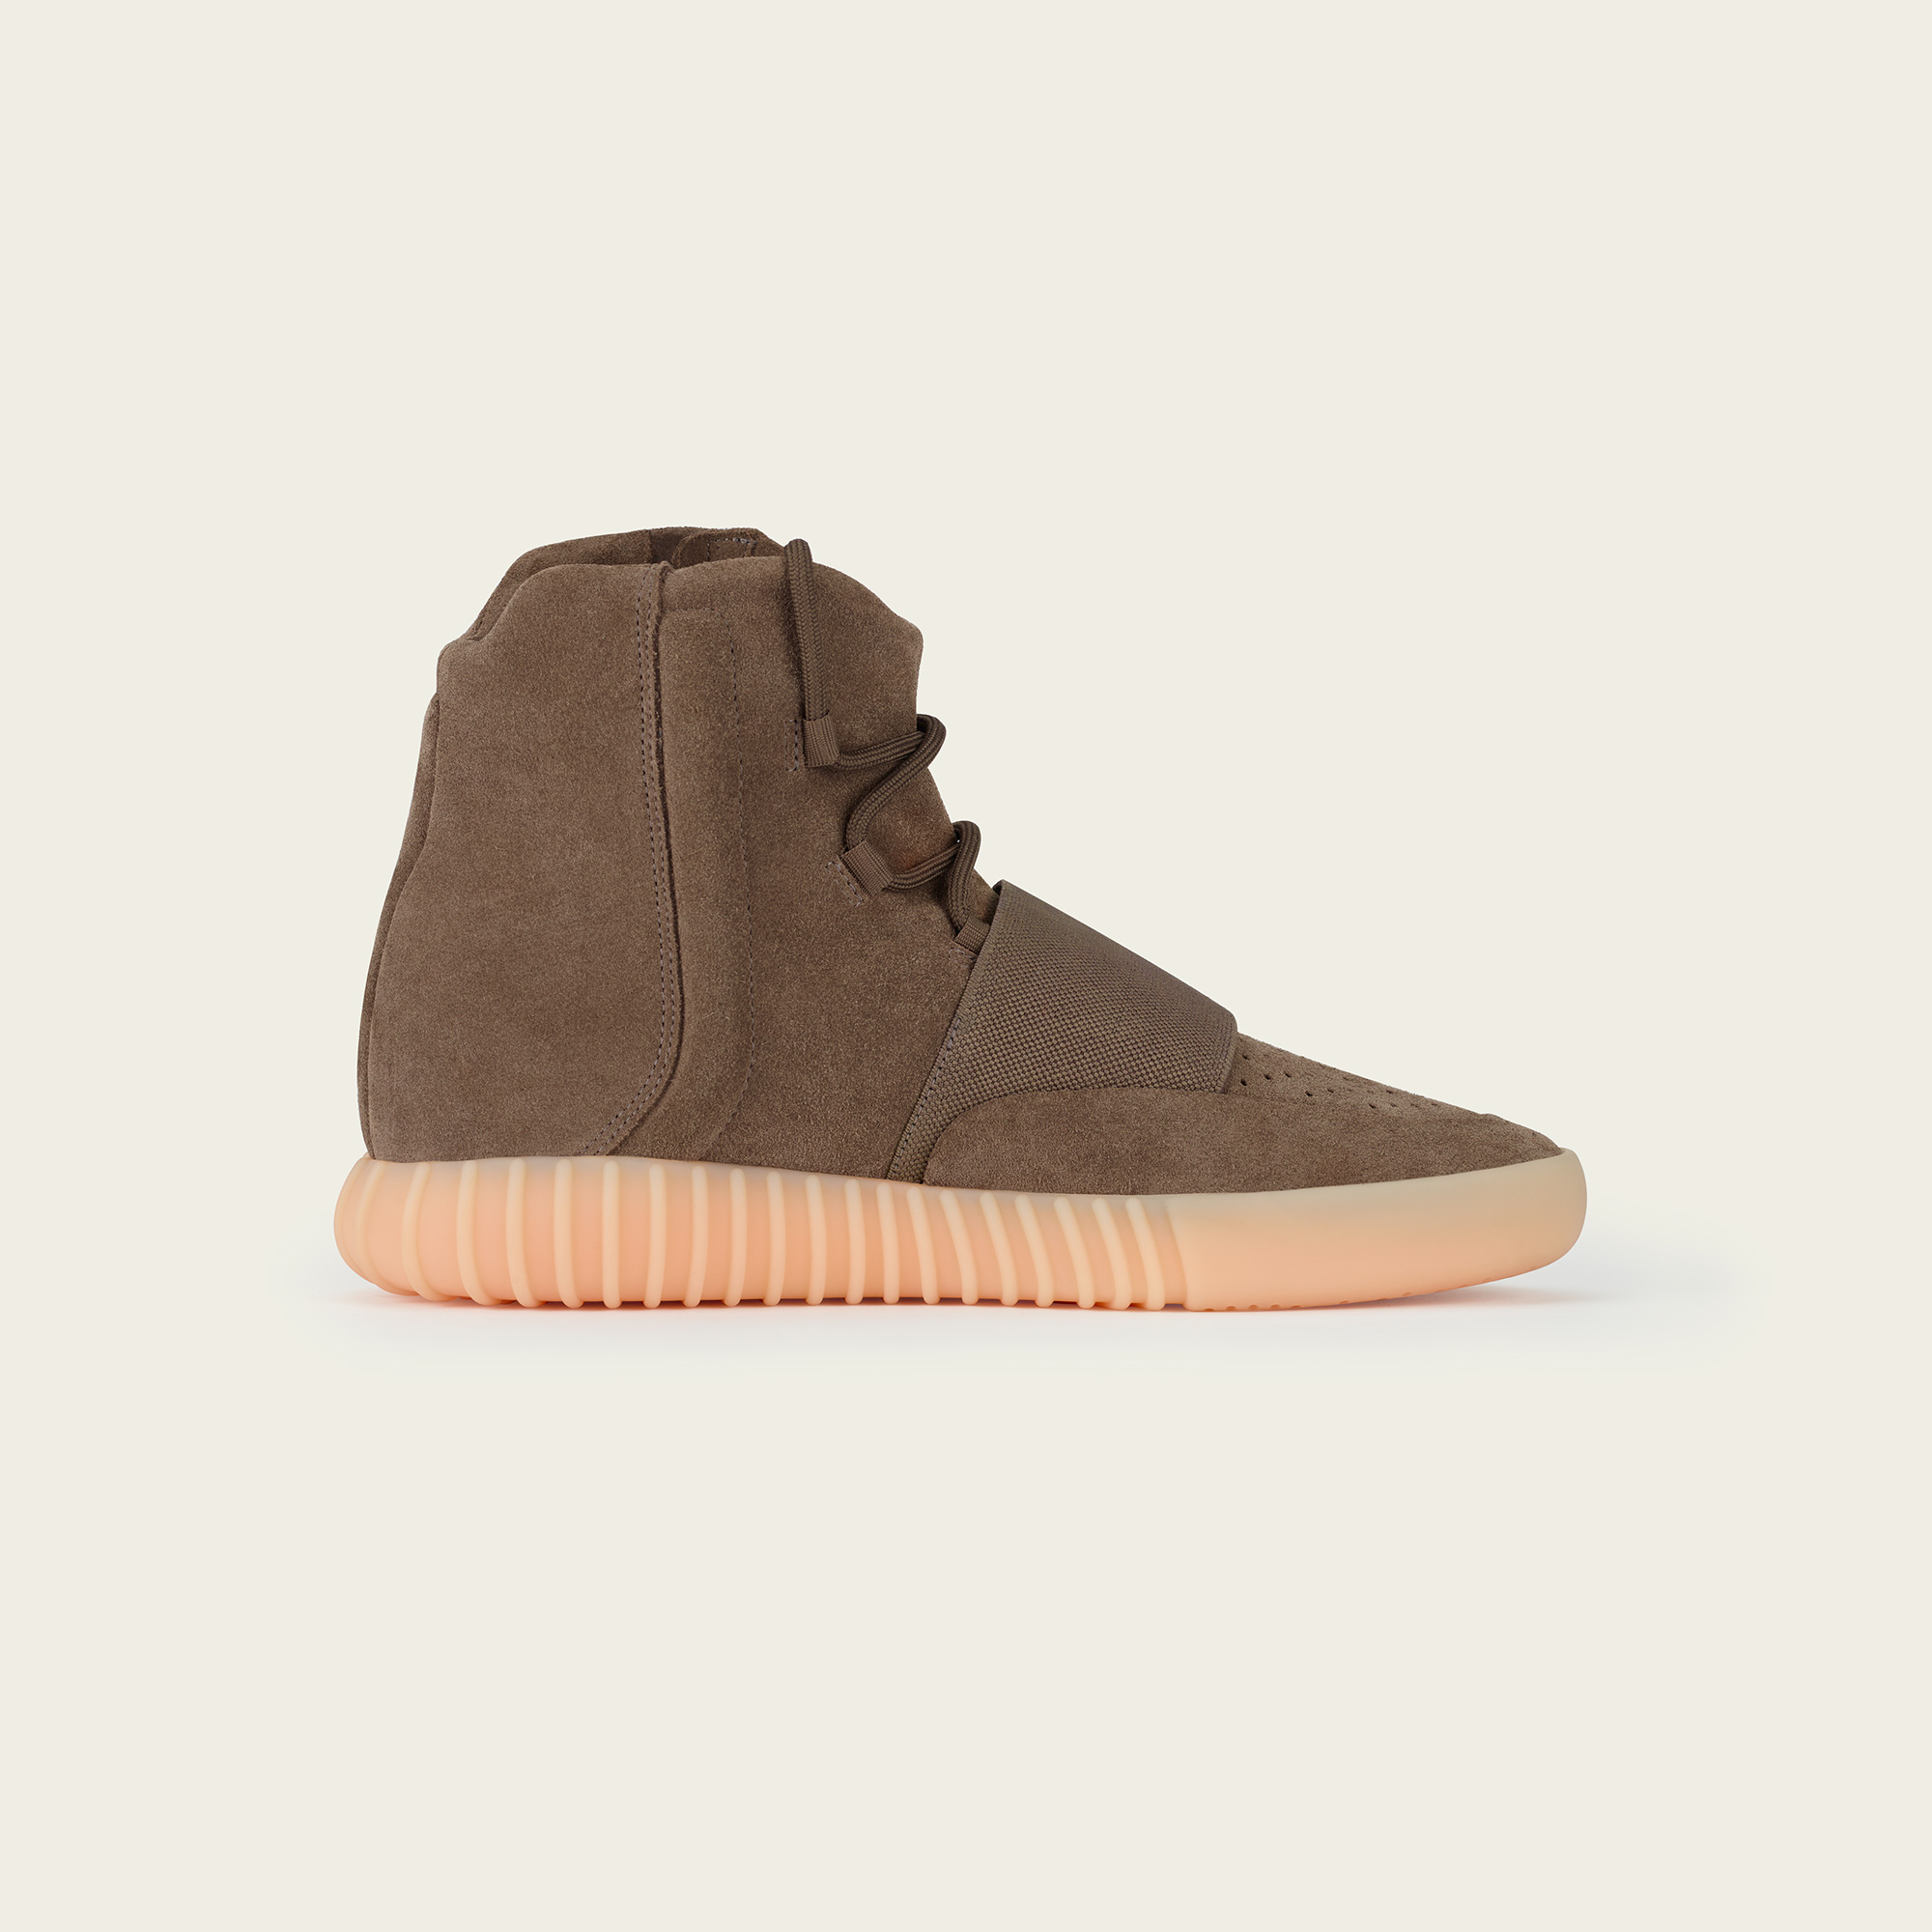 adidas-yeezy-boost-750-brown-3